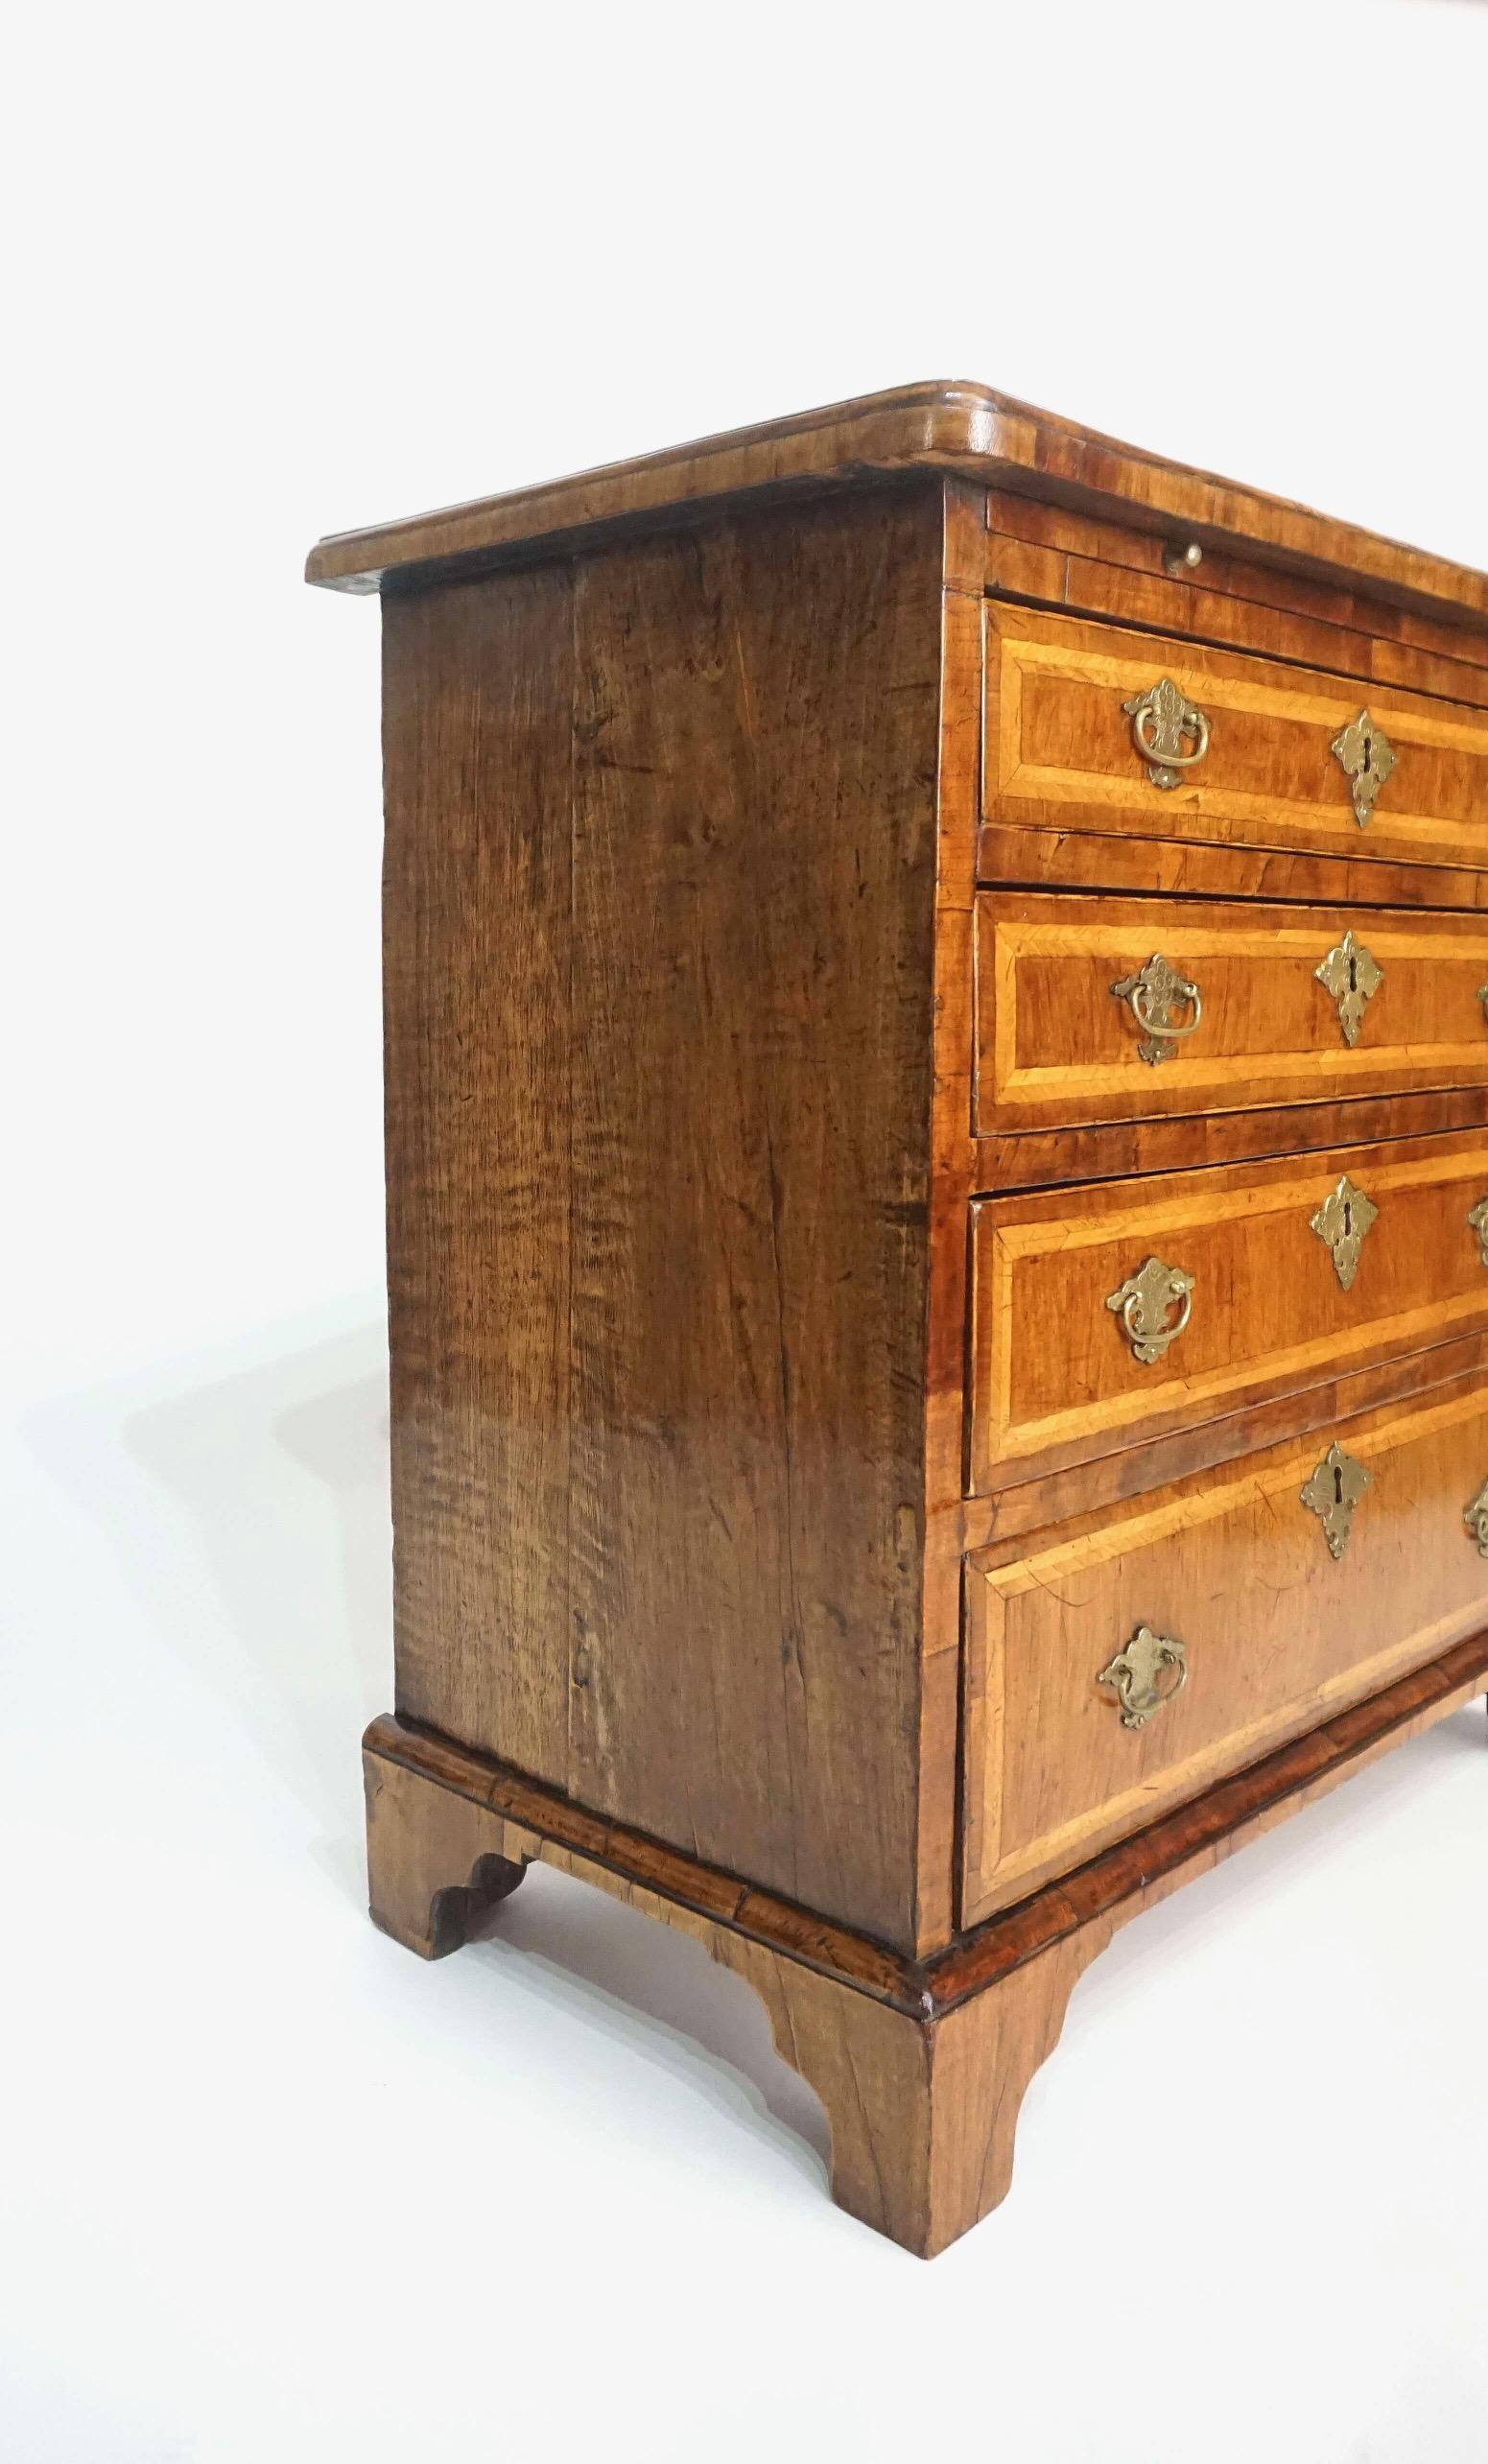 Veneer English Walnut and Satinwood Inlaid Petite Chest or Bachelor's Chest, circa 1715 For Sale